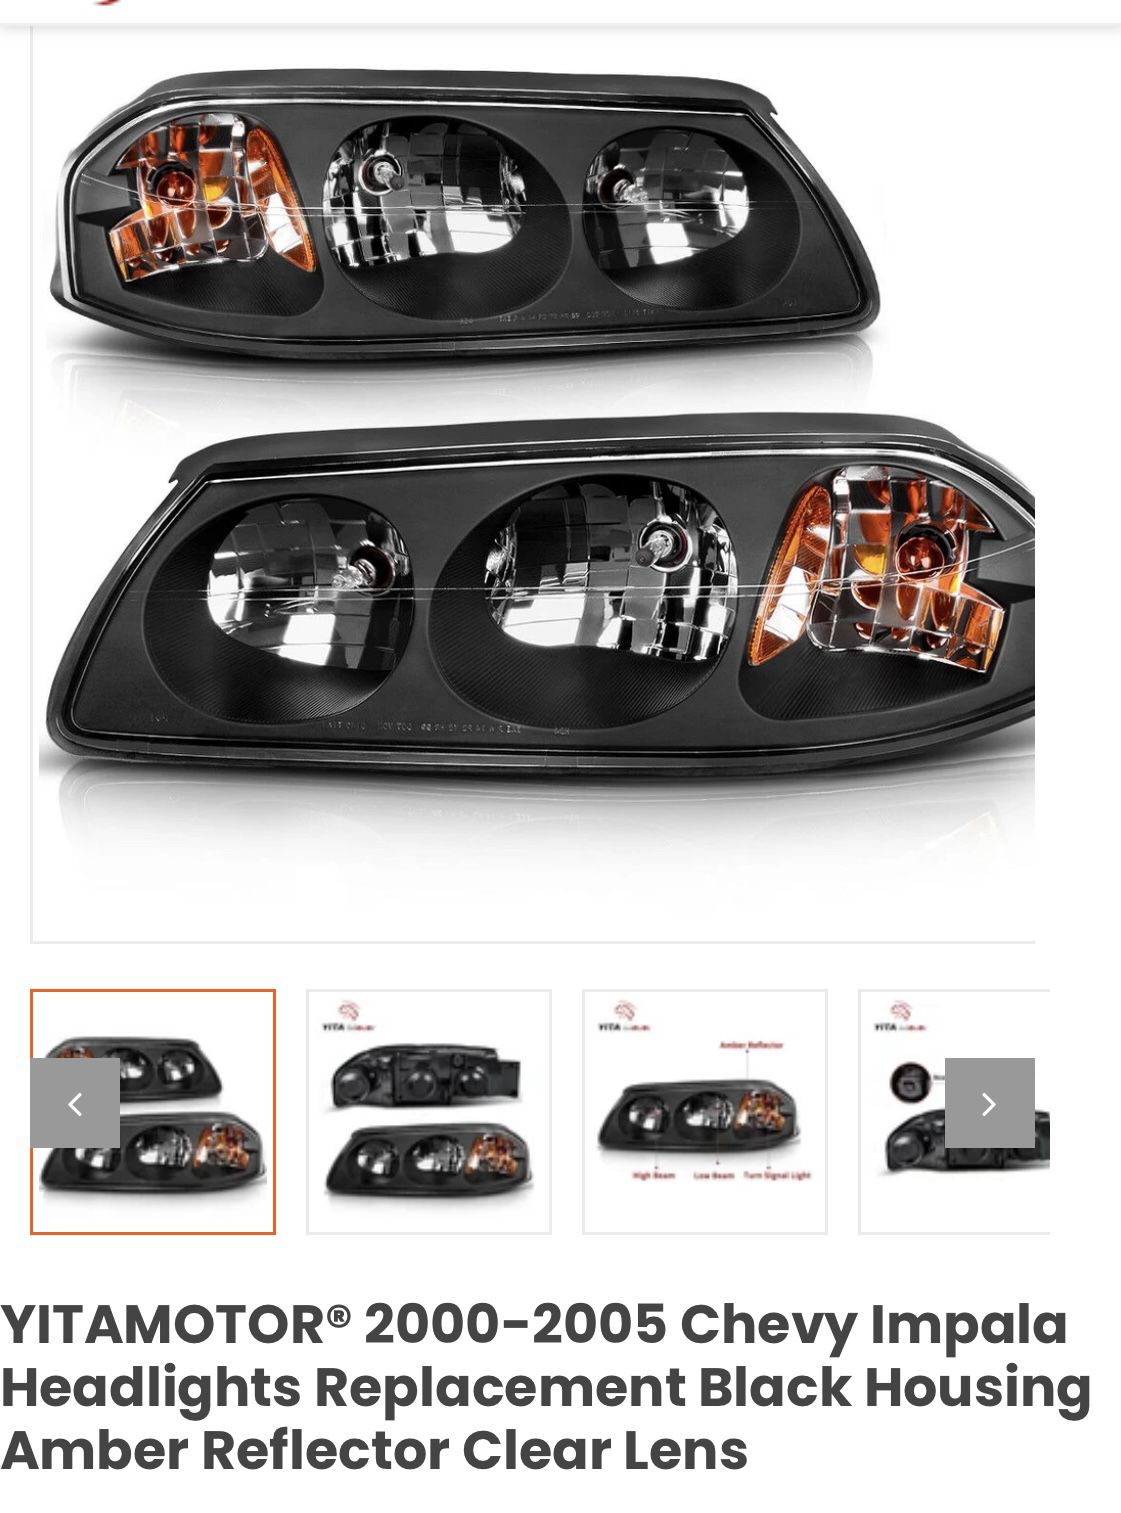 HA0101w118 2000-2005 Chevy Impala Headlights Replacement Black Housing Amber Reflector Clear Lens